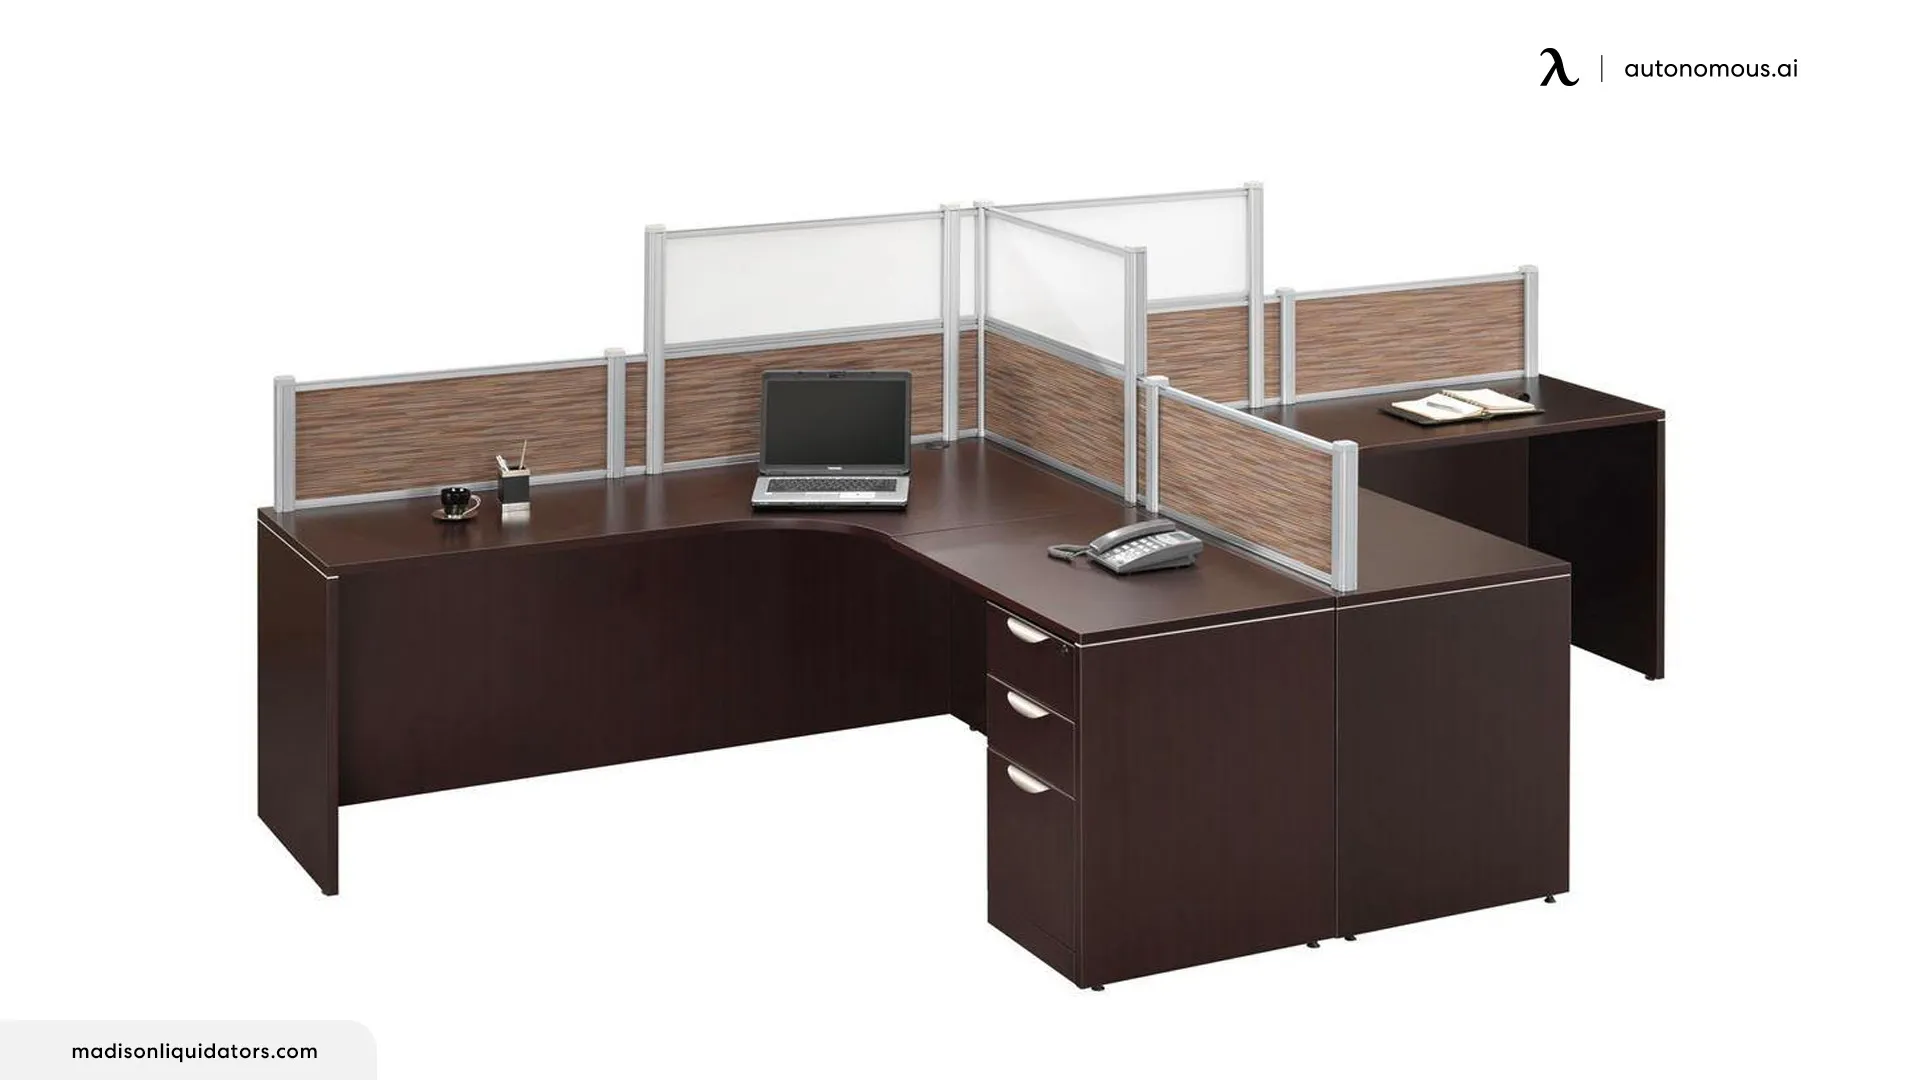 T-Shaped Desk for Two People with Dividers and Drawers